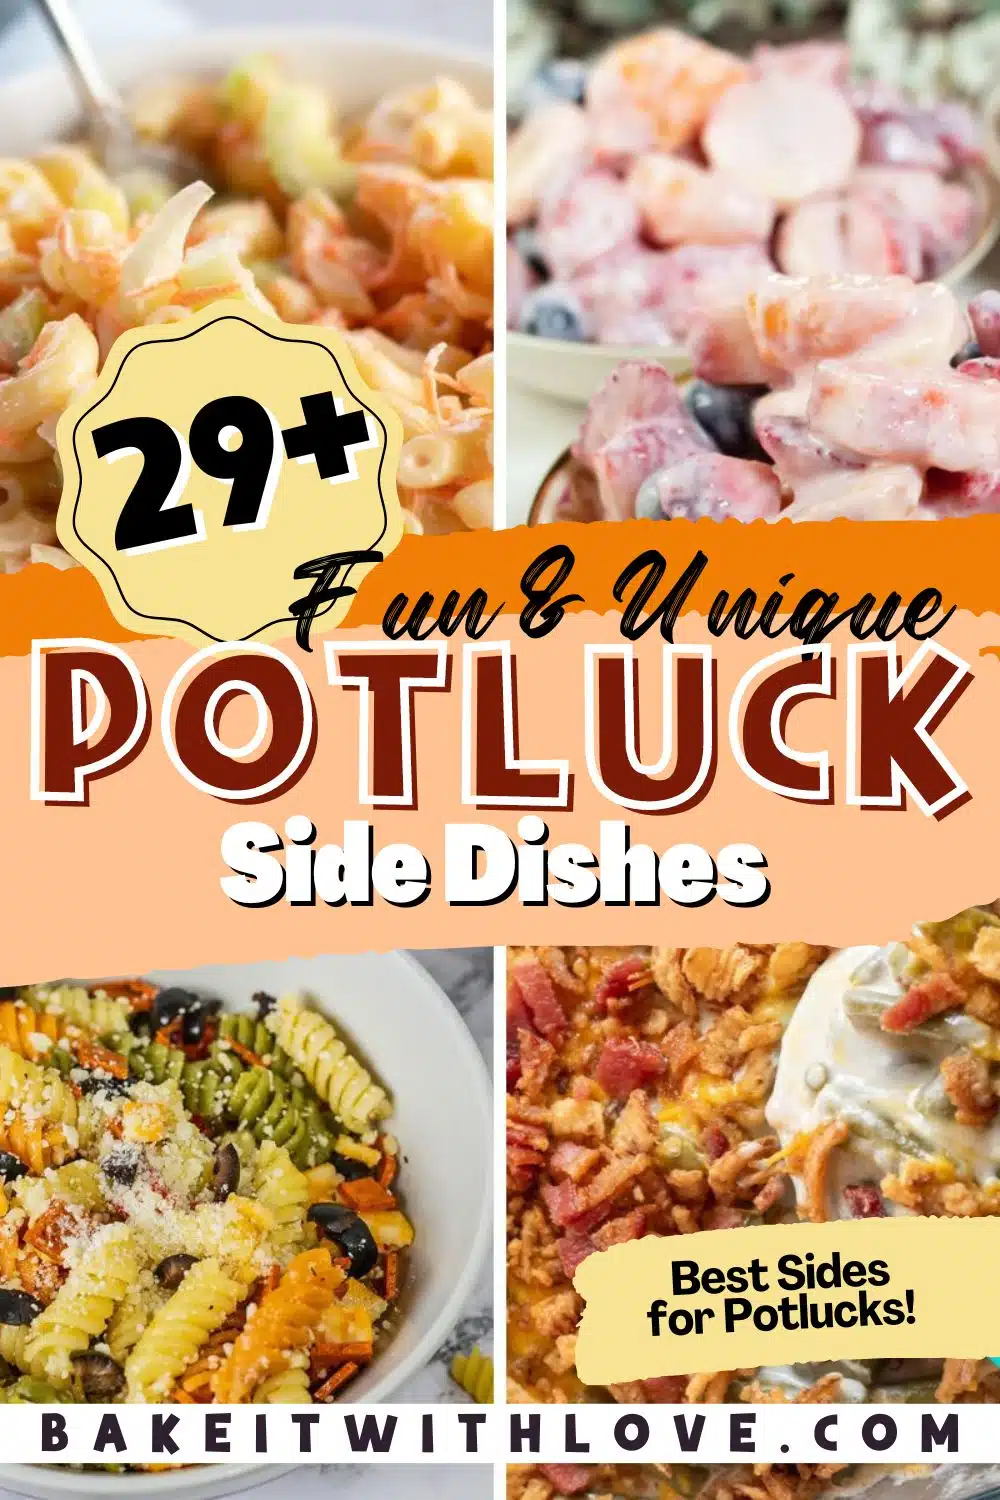 Tall split image with text showing different potluck side dishes.